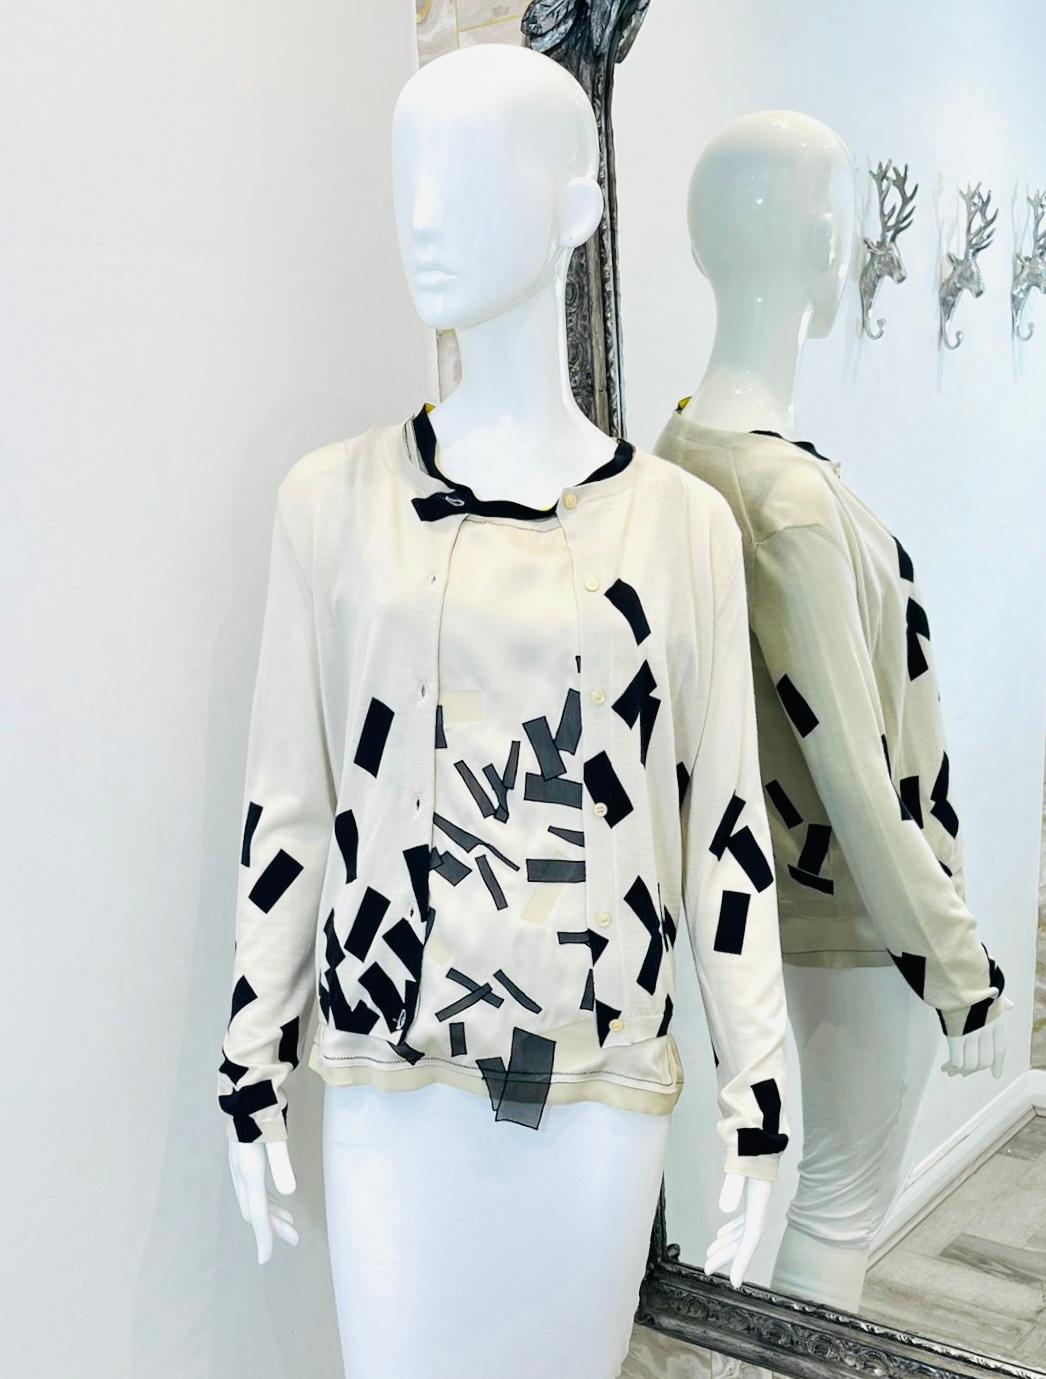 Bottega Veneta 3D Layered Silk & Cashmere Printed Top & Cardigan Set

Ivory set designed with black geometric prints to the front.

Sleeveless top styled with 3D layered effect detailed with black trimmings to the round neckline and shoulders with